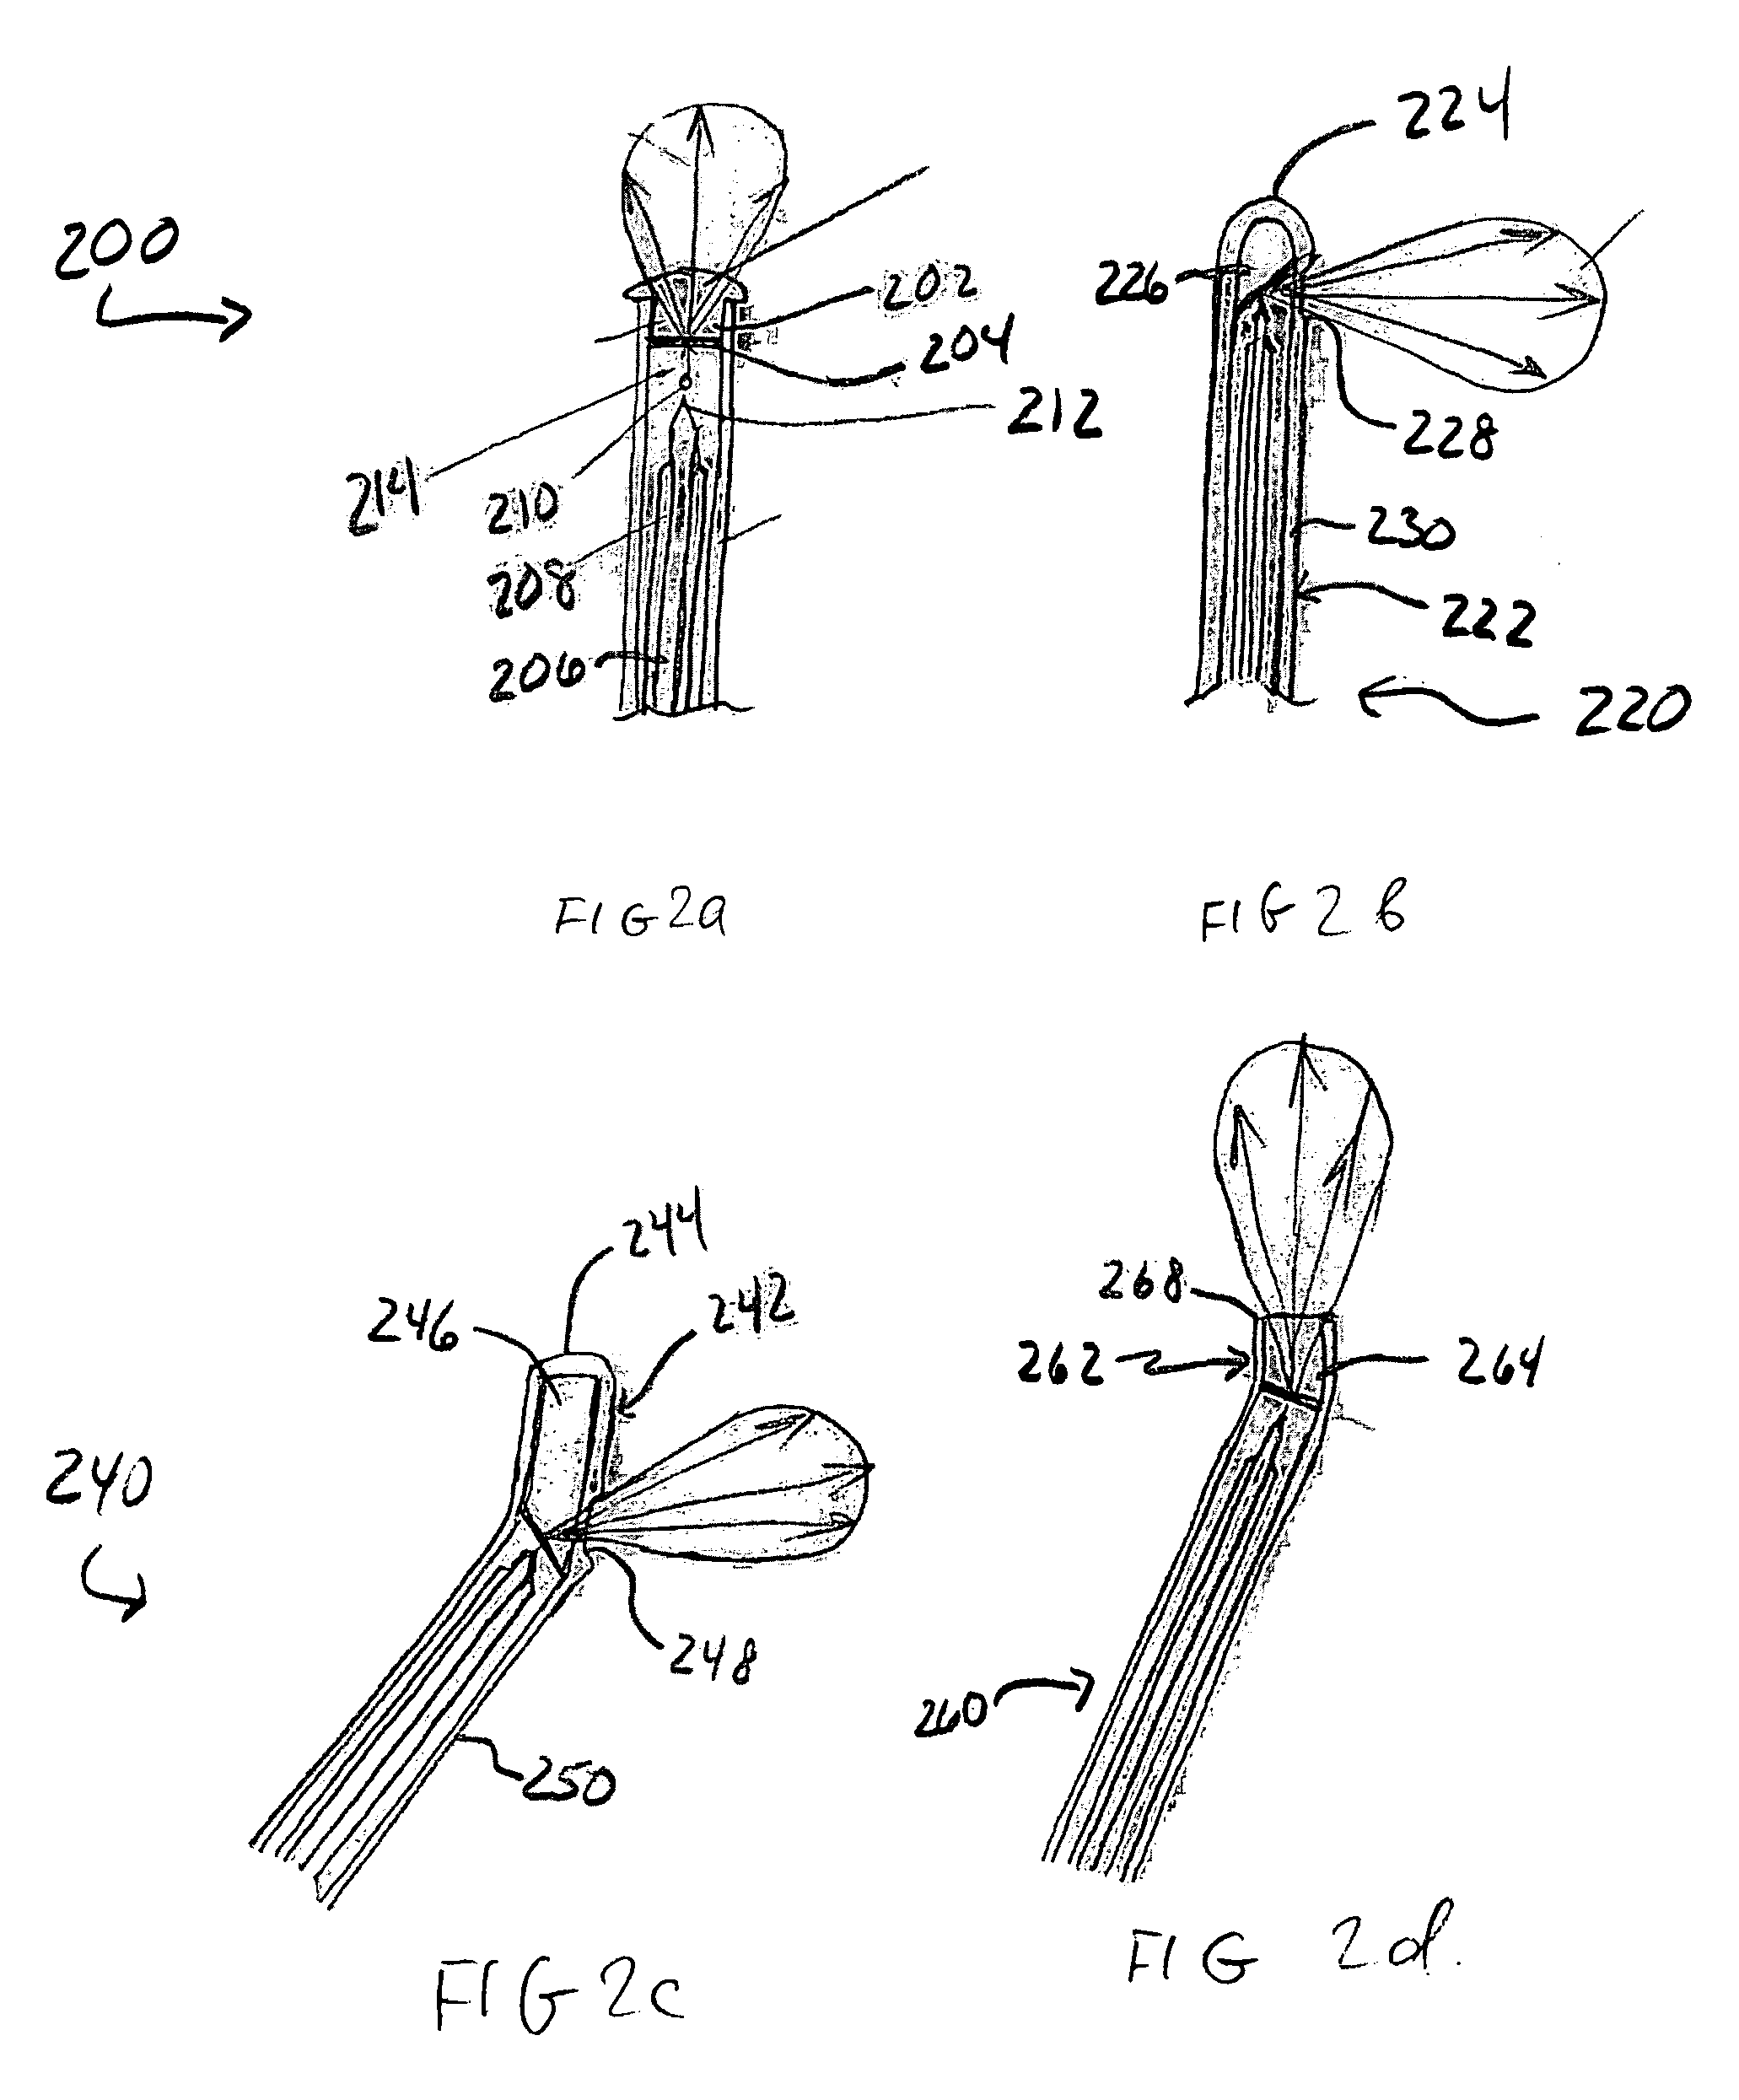 X-ray apparatus with field emission current stabilization and method of providing x-ray radiation therapy